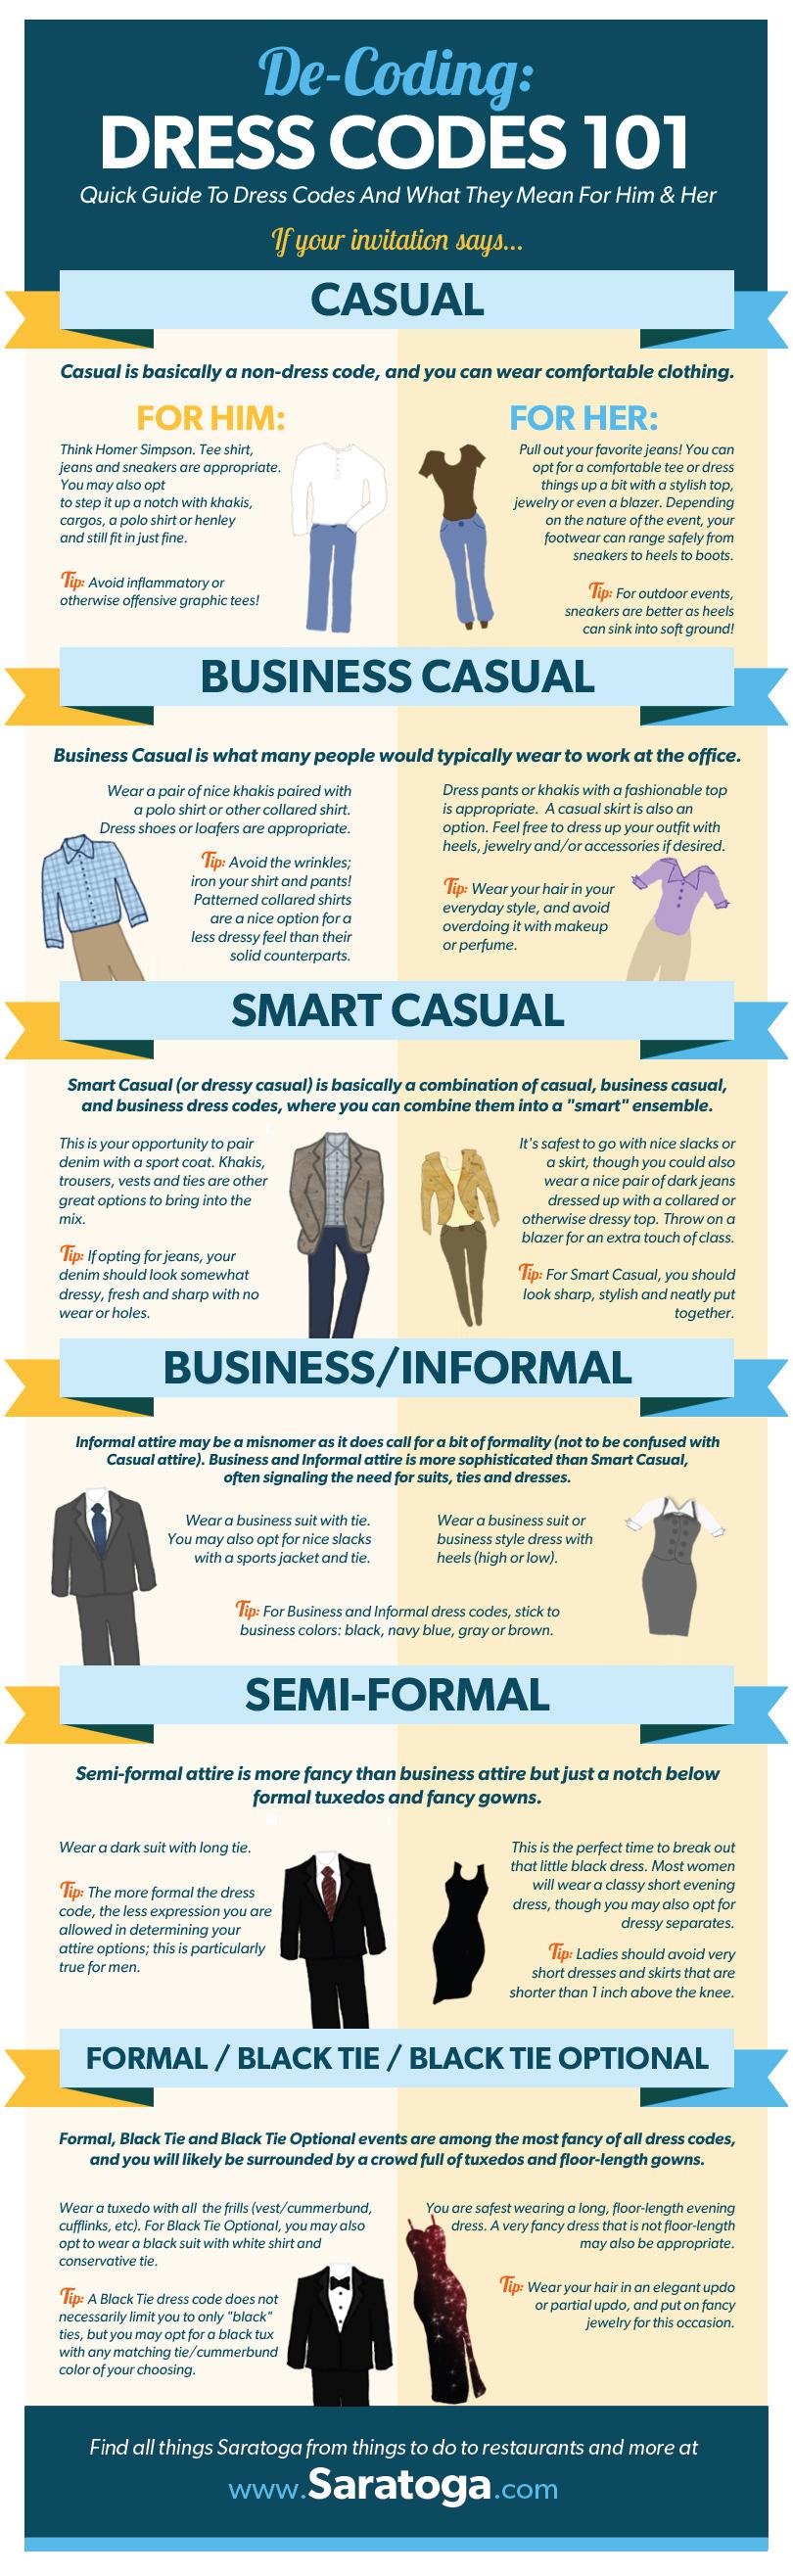 Dress Code Guide: What Does Dressy Casual Mean? 